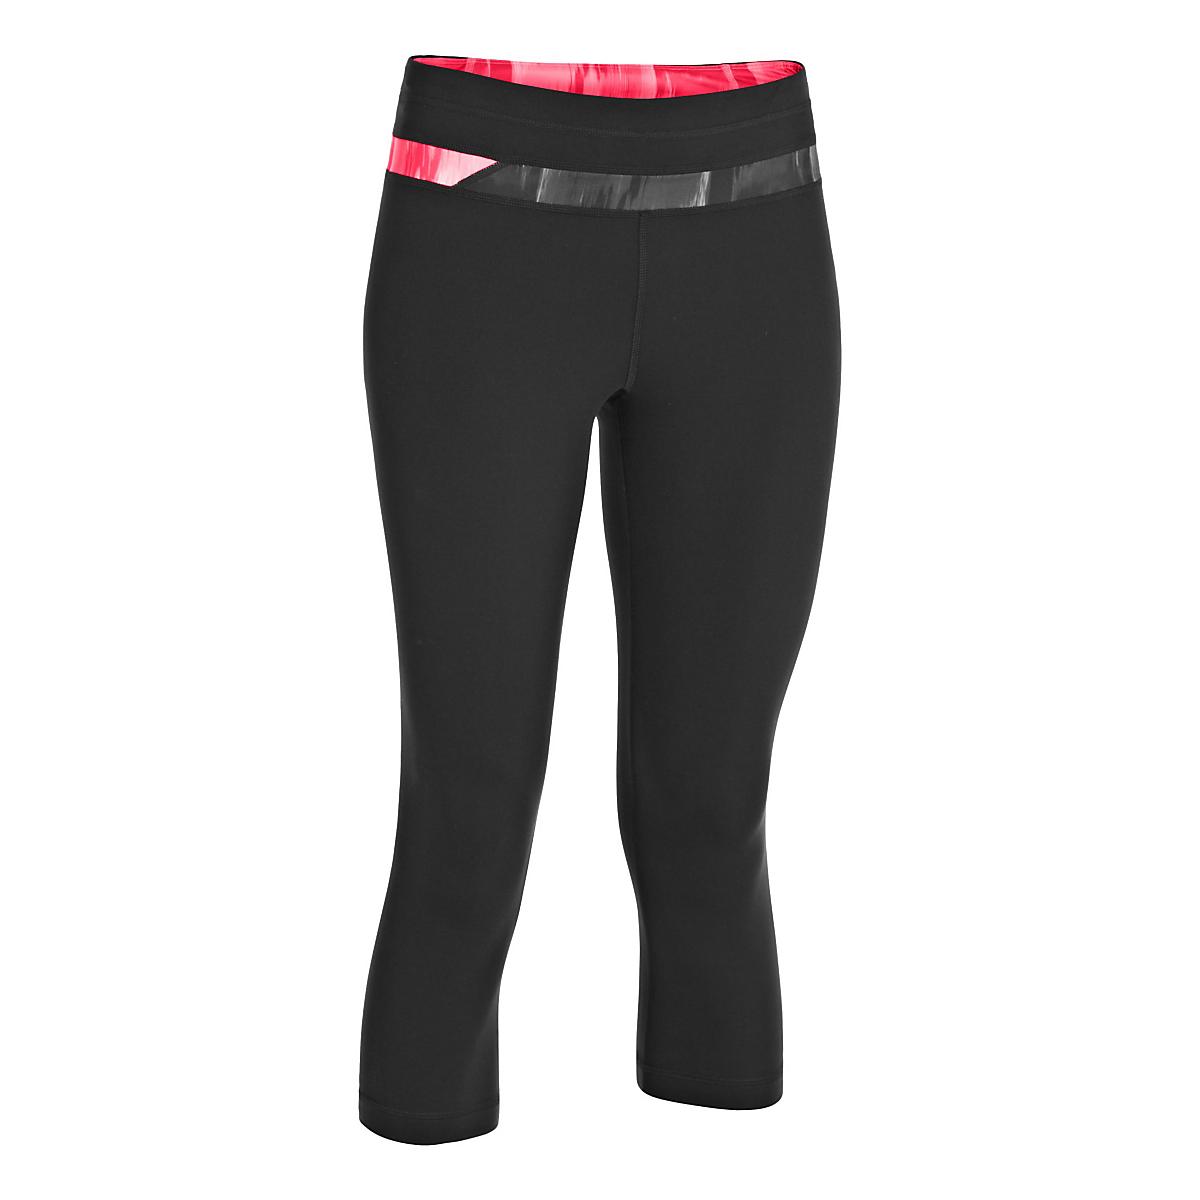 Womens Under Armour Authentic 15 Capri Tights at Road Runner Sports